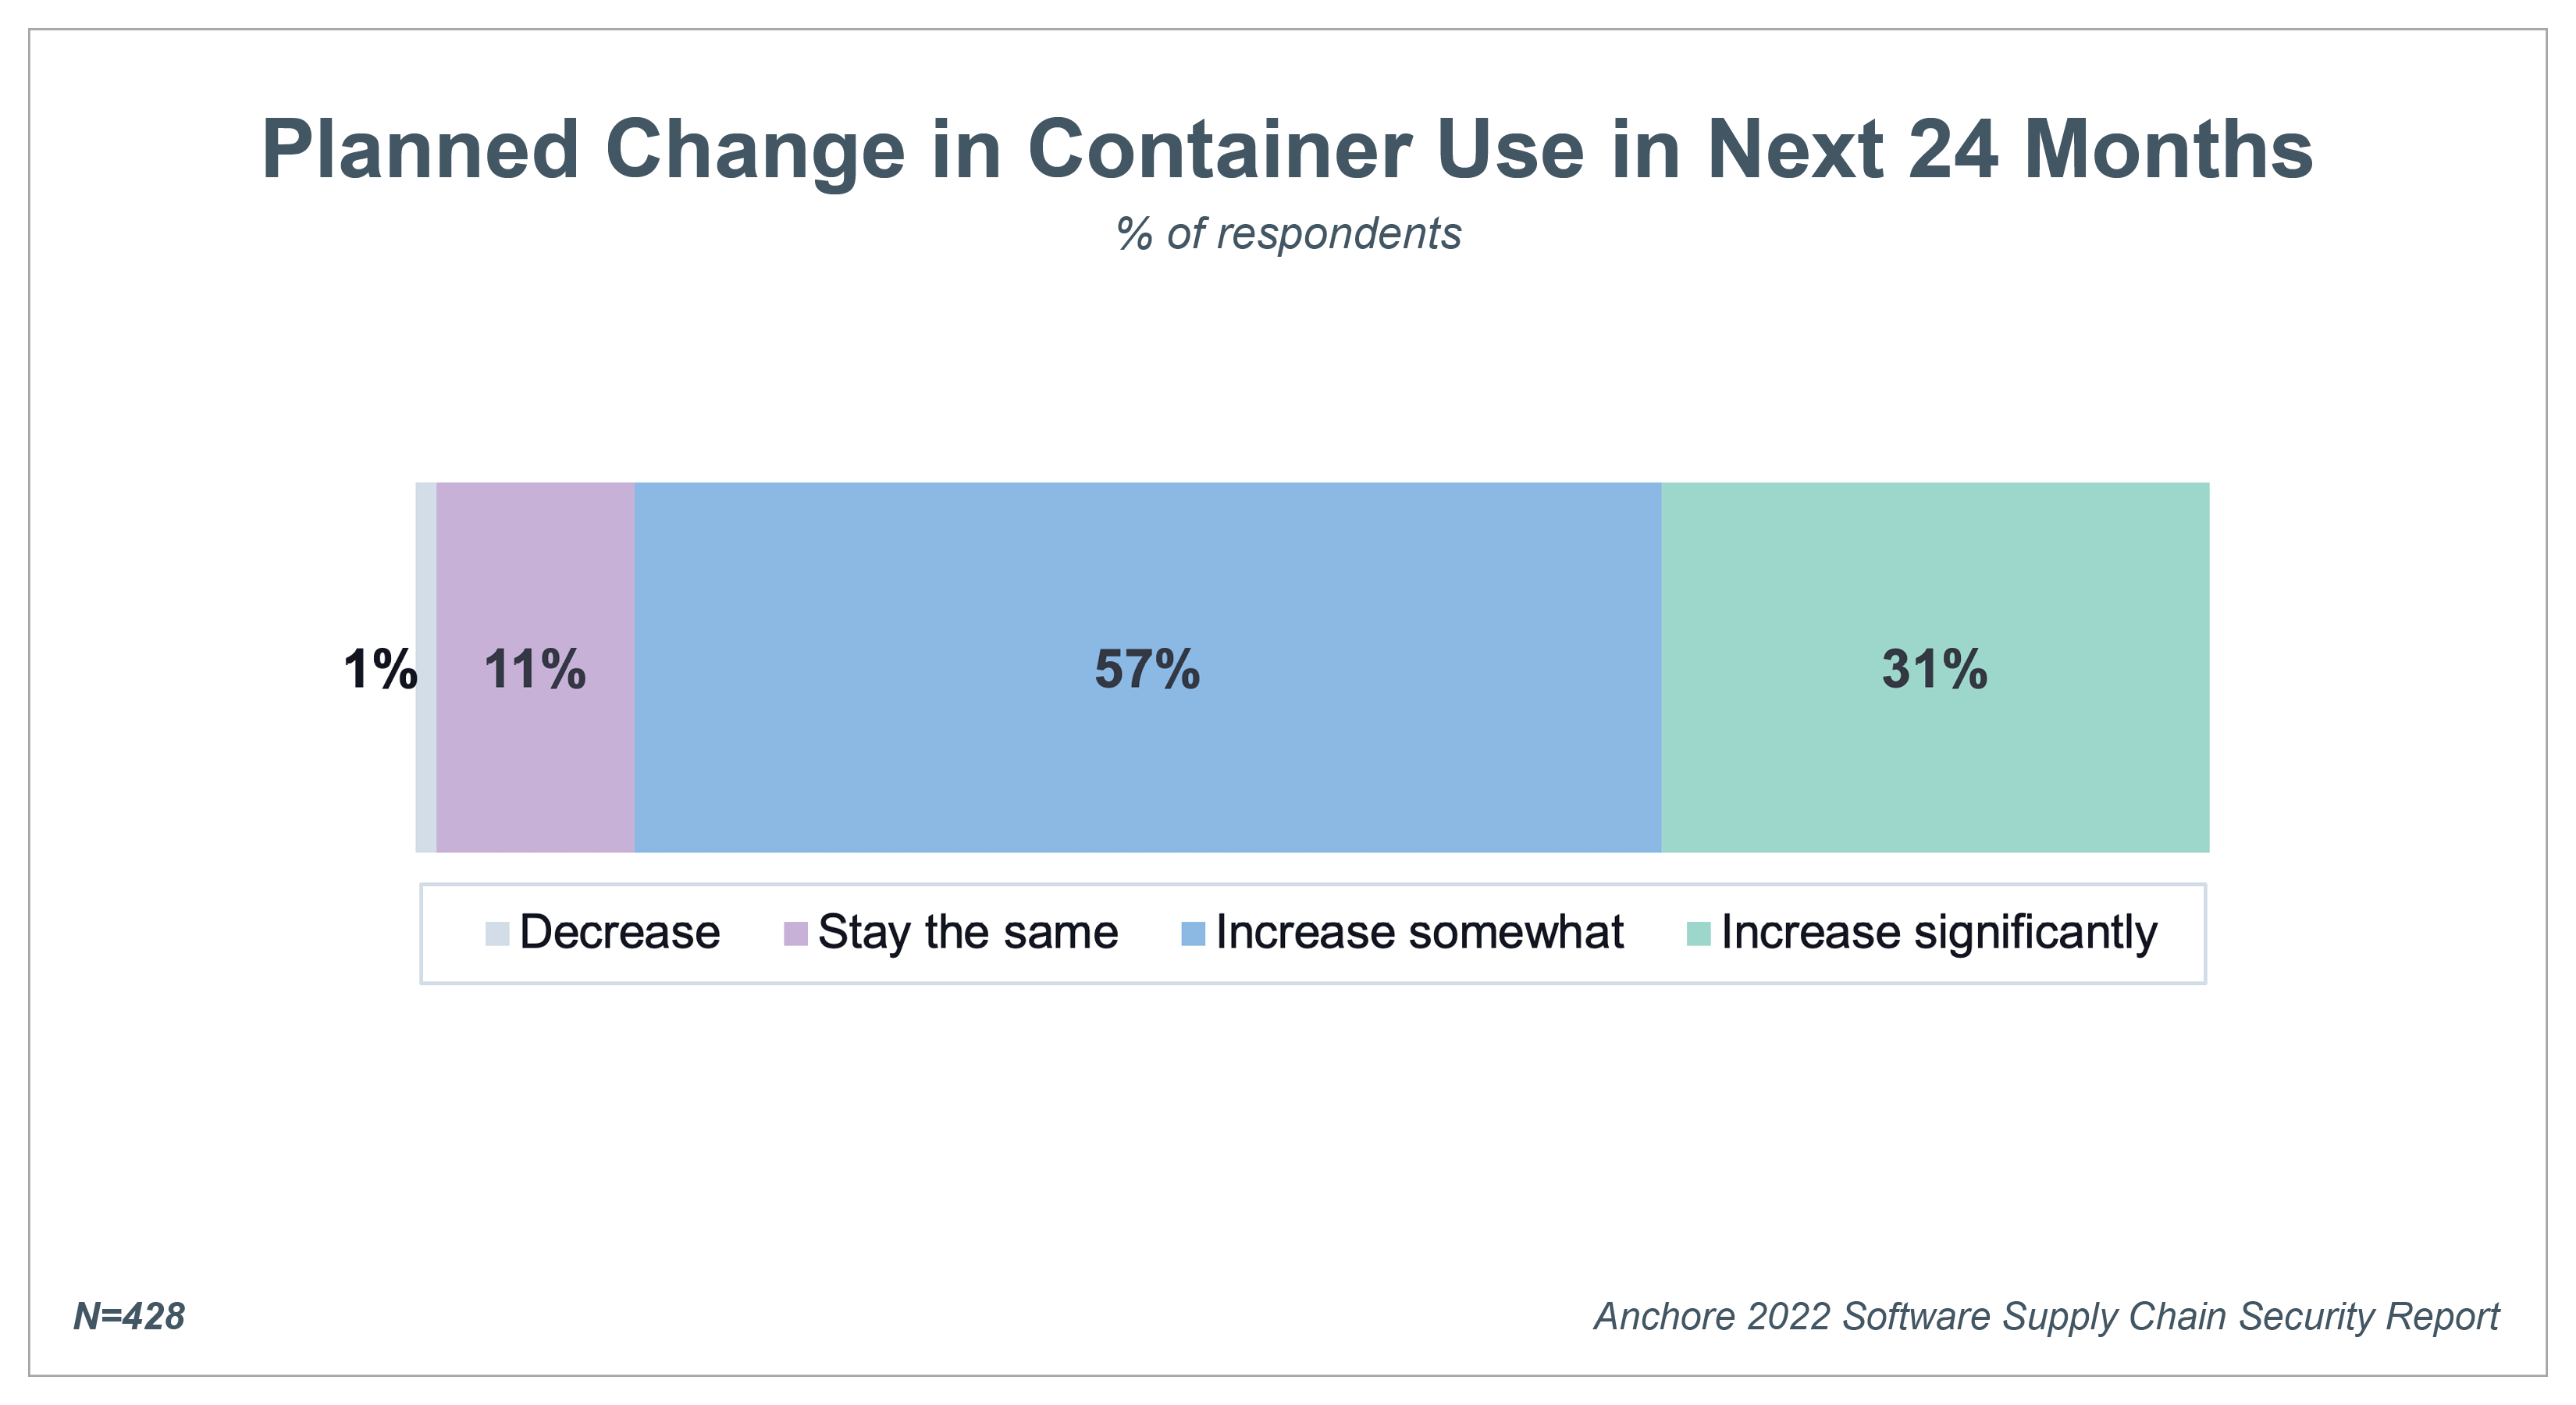 Container use statistics from Anchore 2022 Software Supply Chain Security Survey